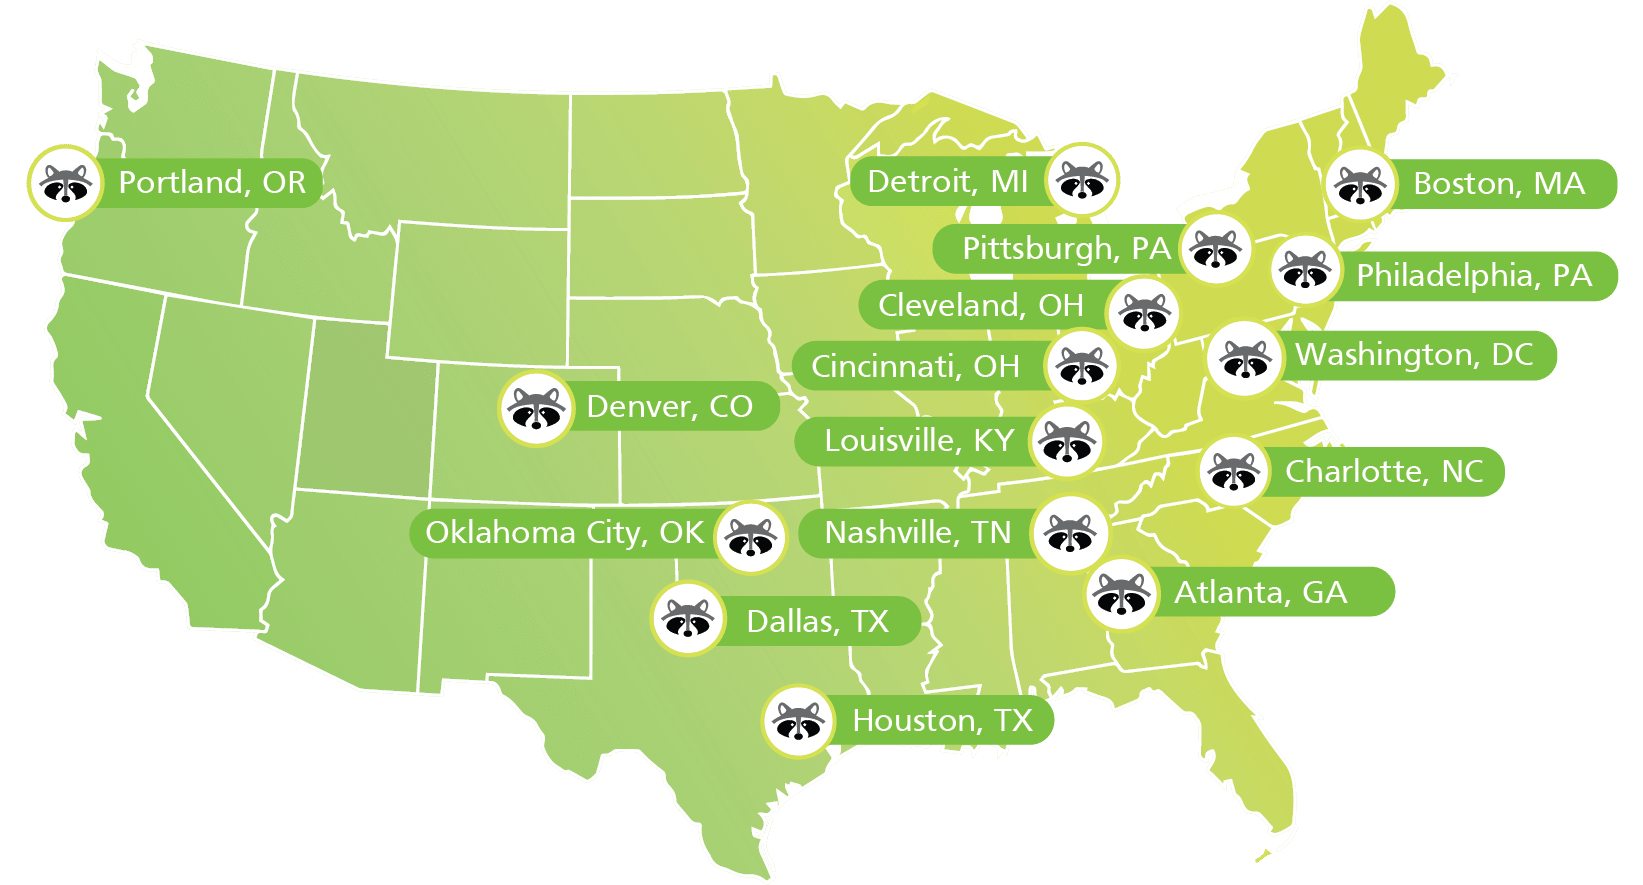 Skedaddle pest control franchise available territories map.